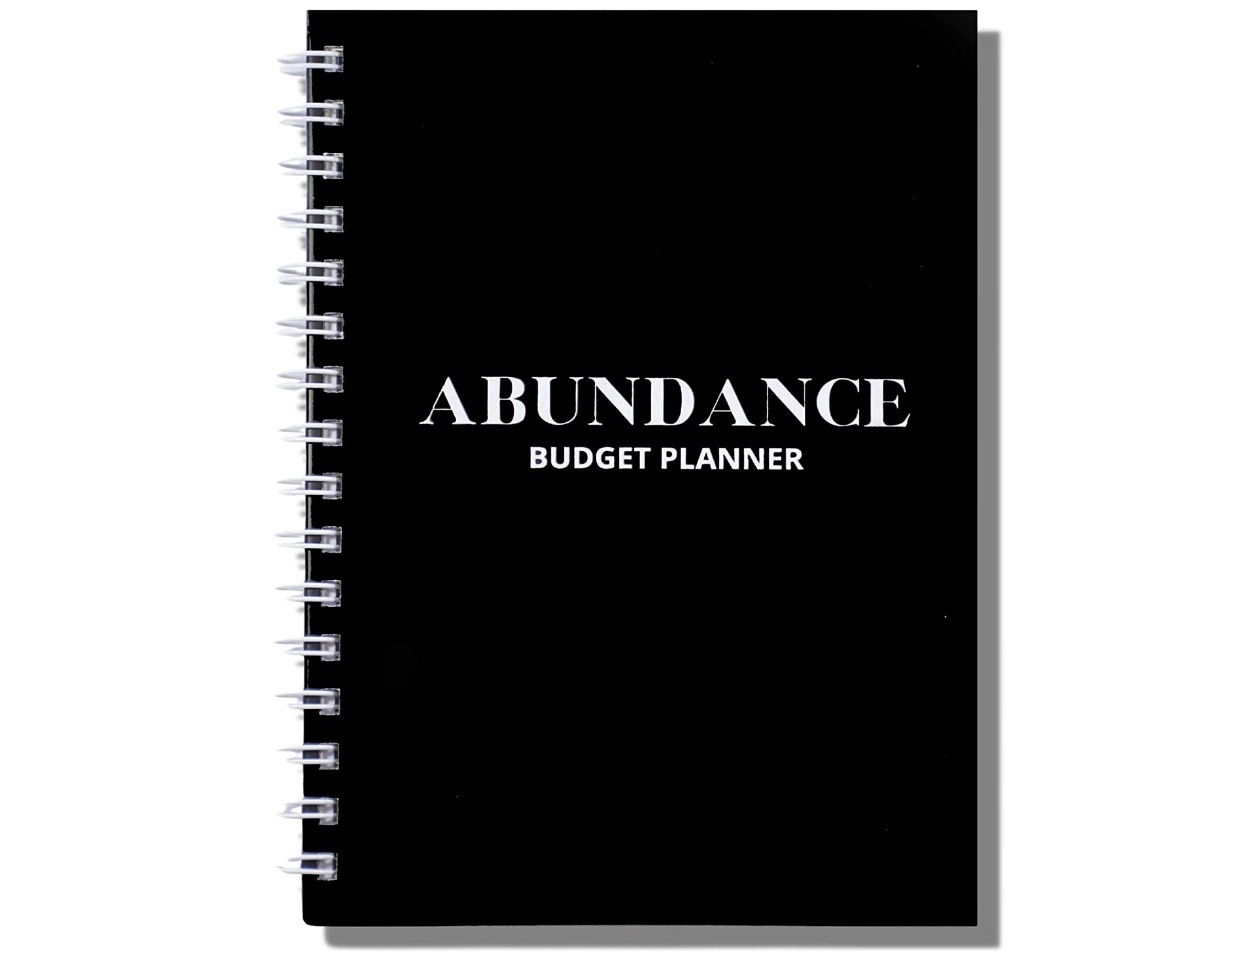 Budget Planner: Printable Pack Personal Size - Crossbow Planner Co.